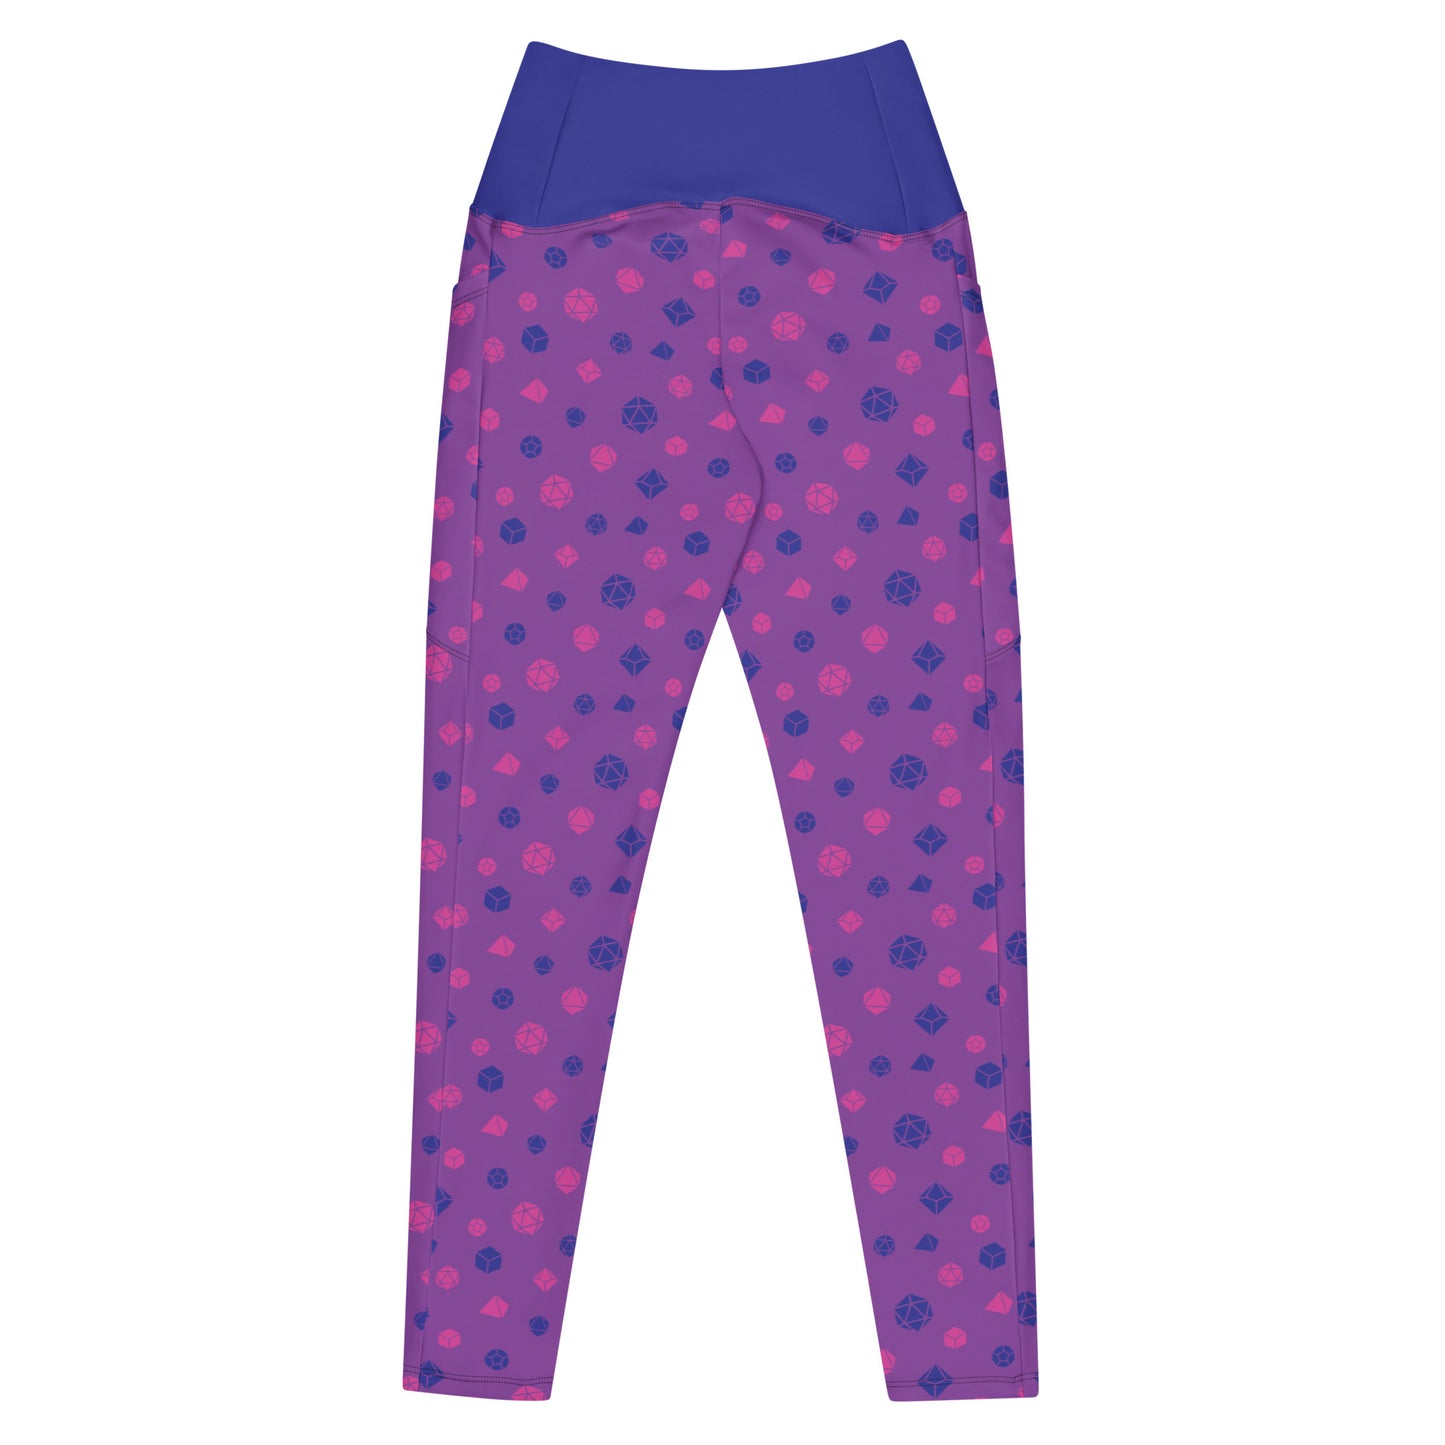 bisexual dice leggings flat on a white background